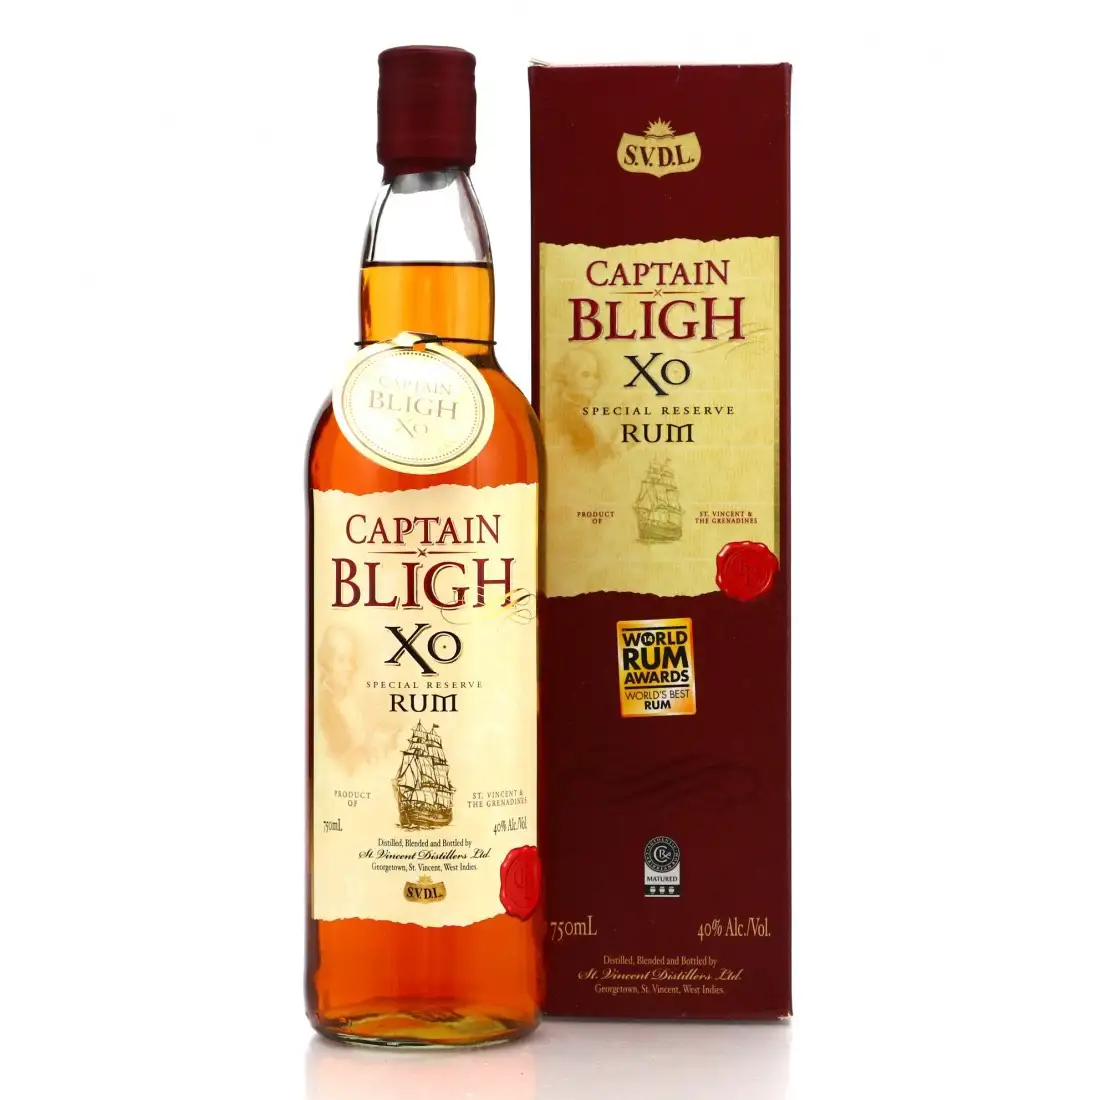 Image of the front of the bottle of the rum Captain Bligh XO